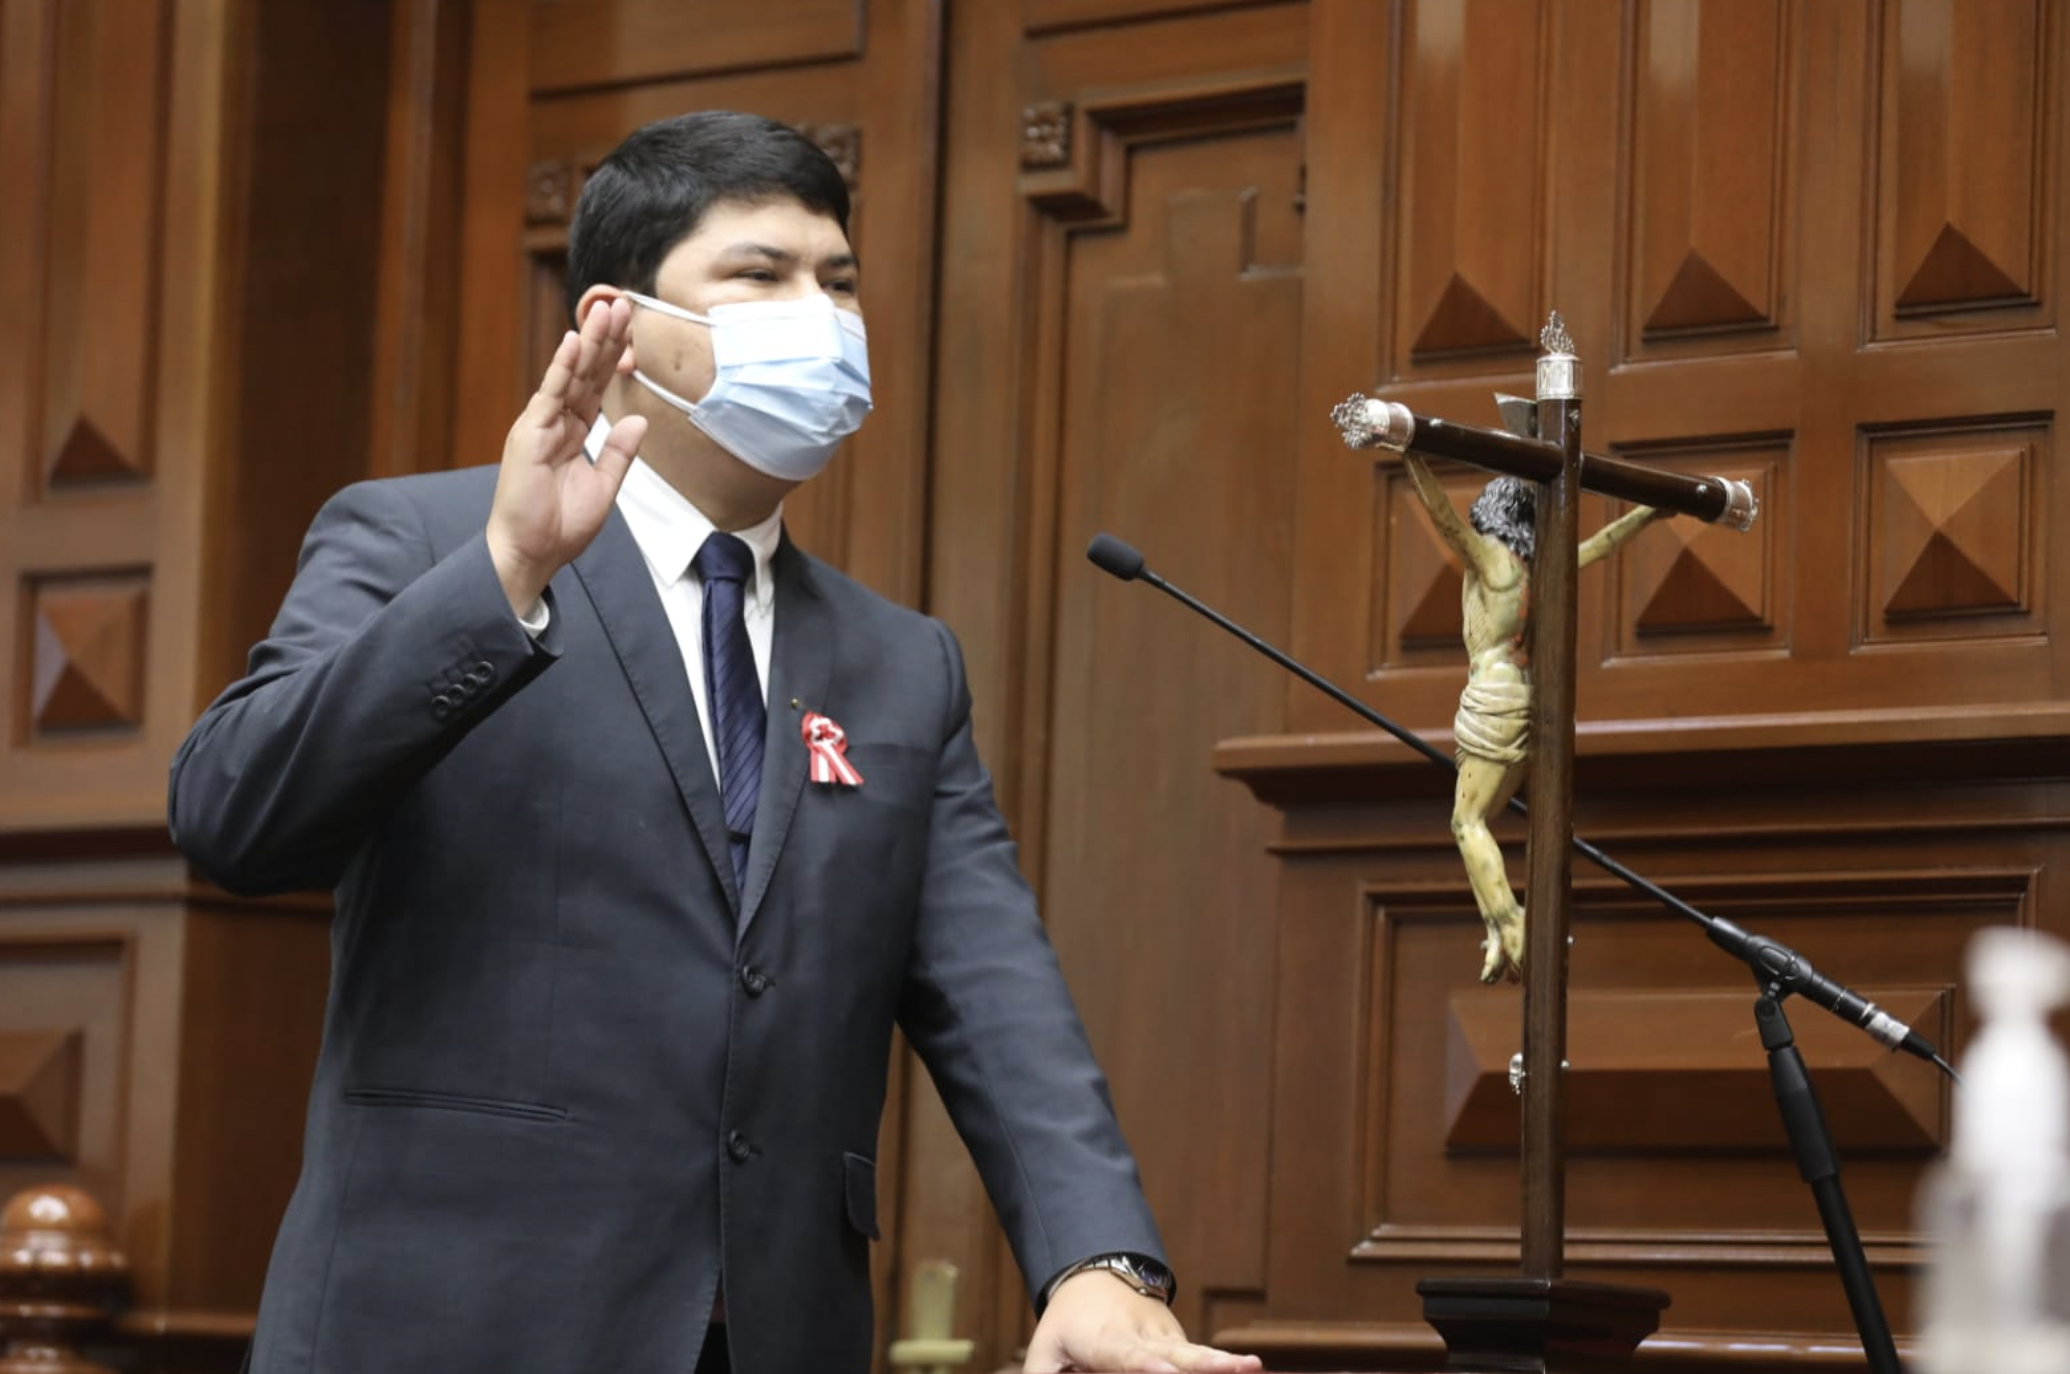 Fujimori congressman Eduardo Castillo is prohibited from approaching his wife, who denounced him for violence.